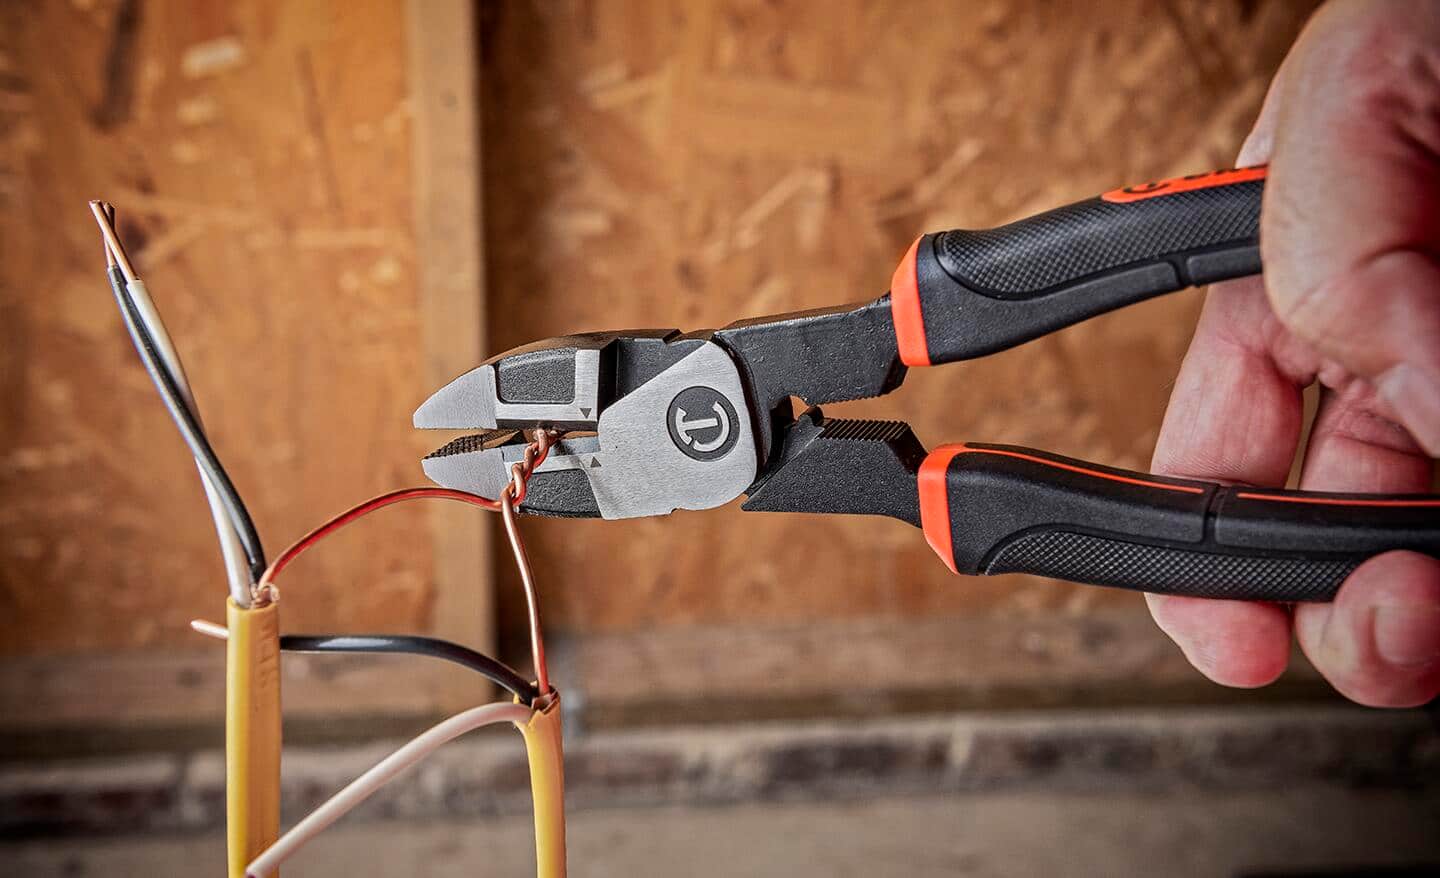 50+ Must-Have Tools You Need Before Starting Any Basic DIY Home